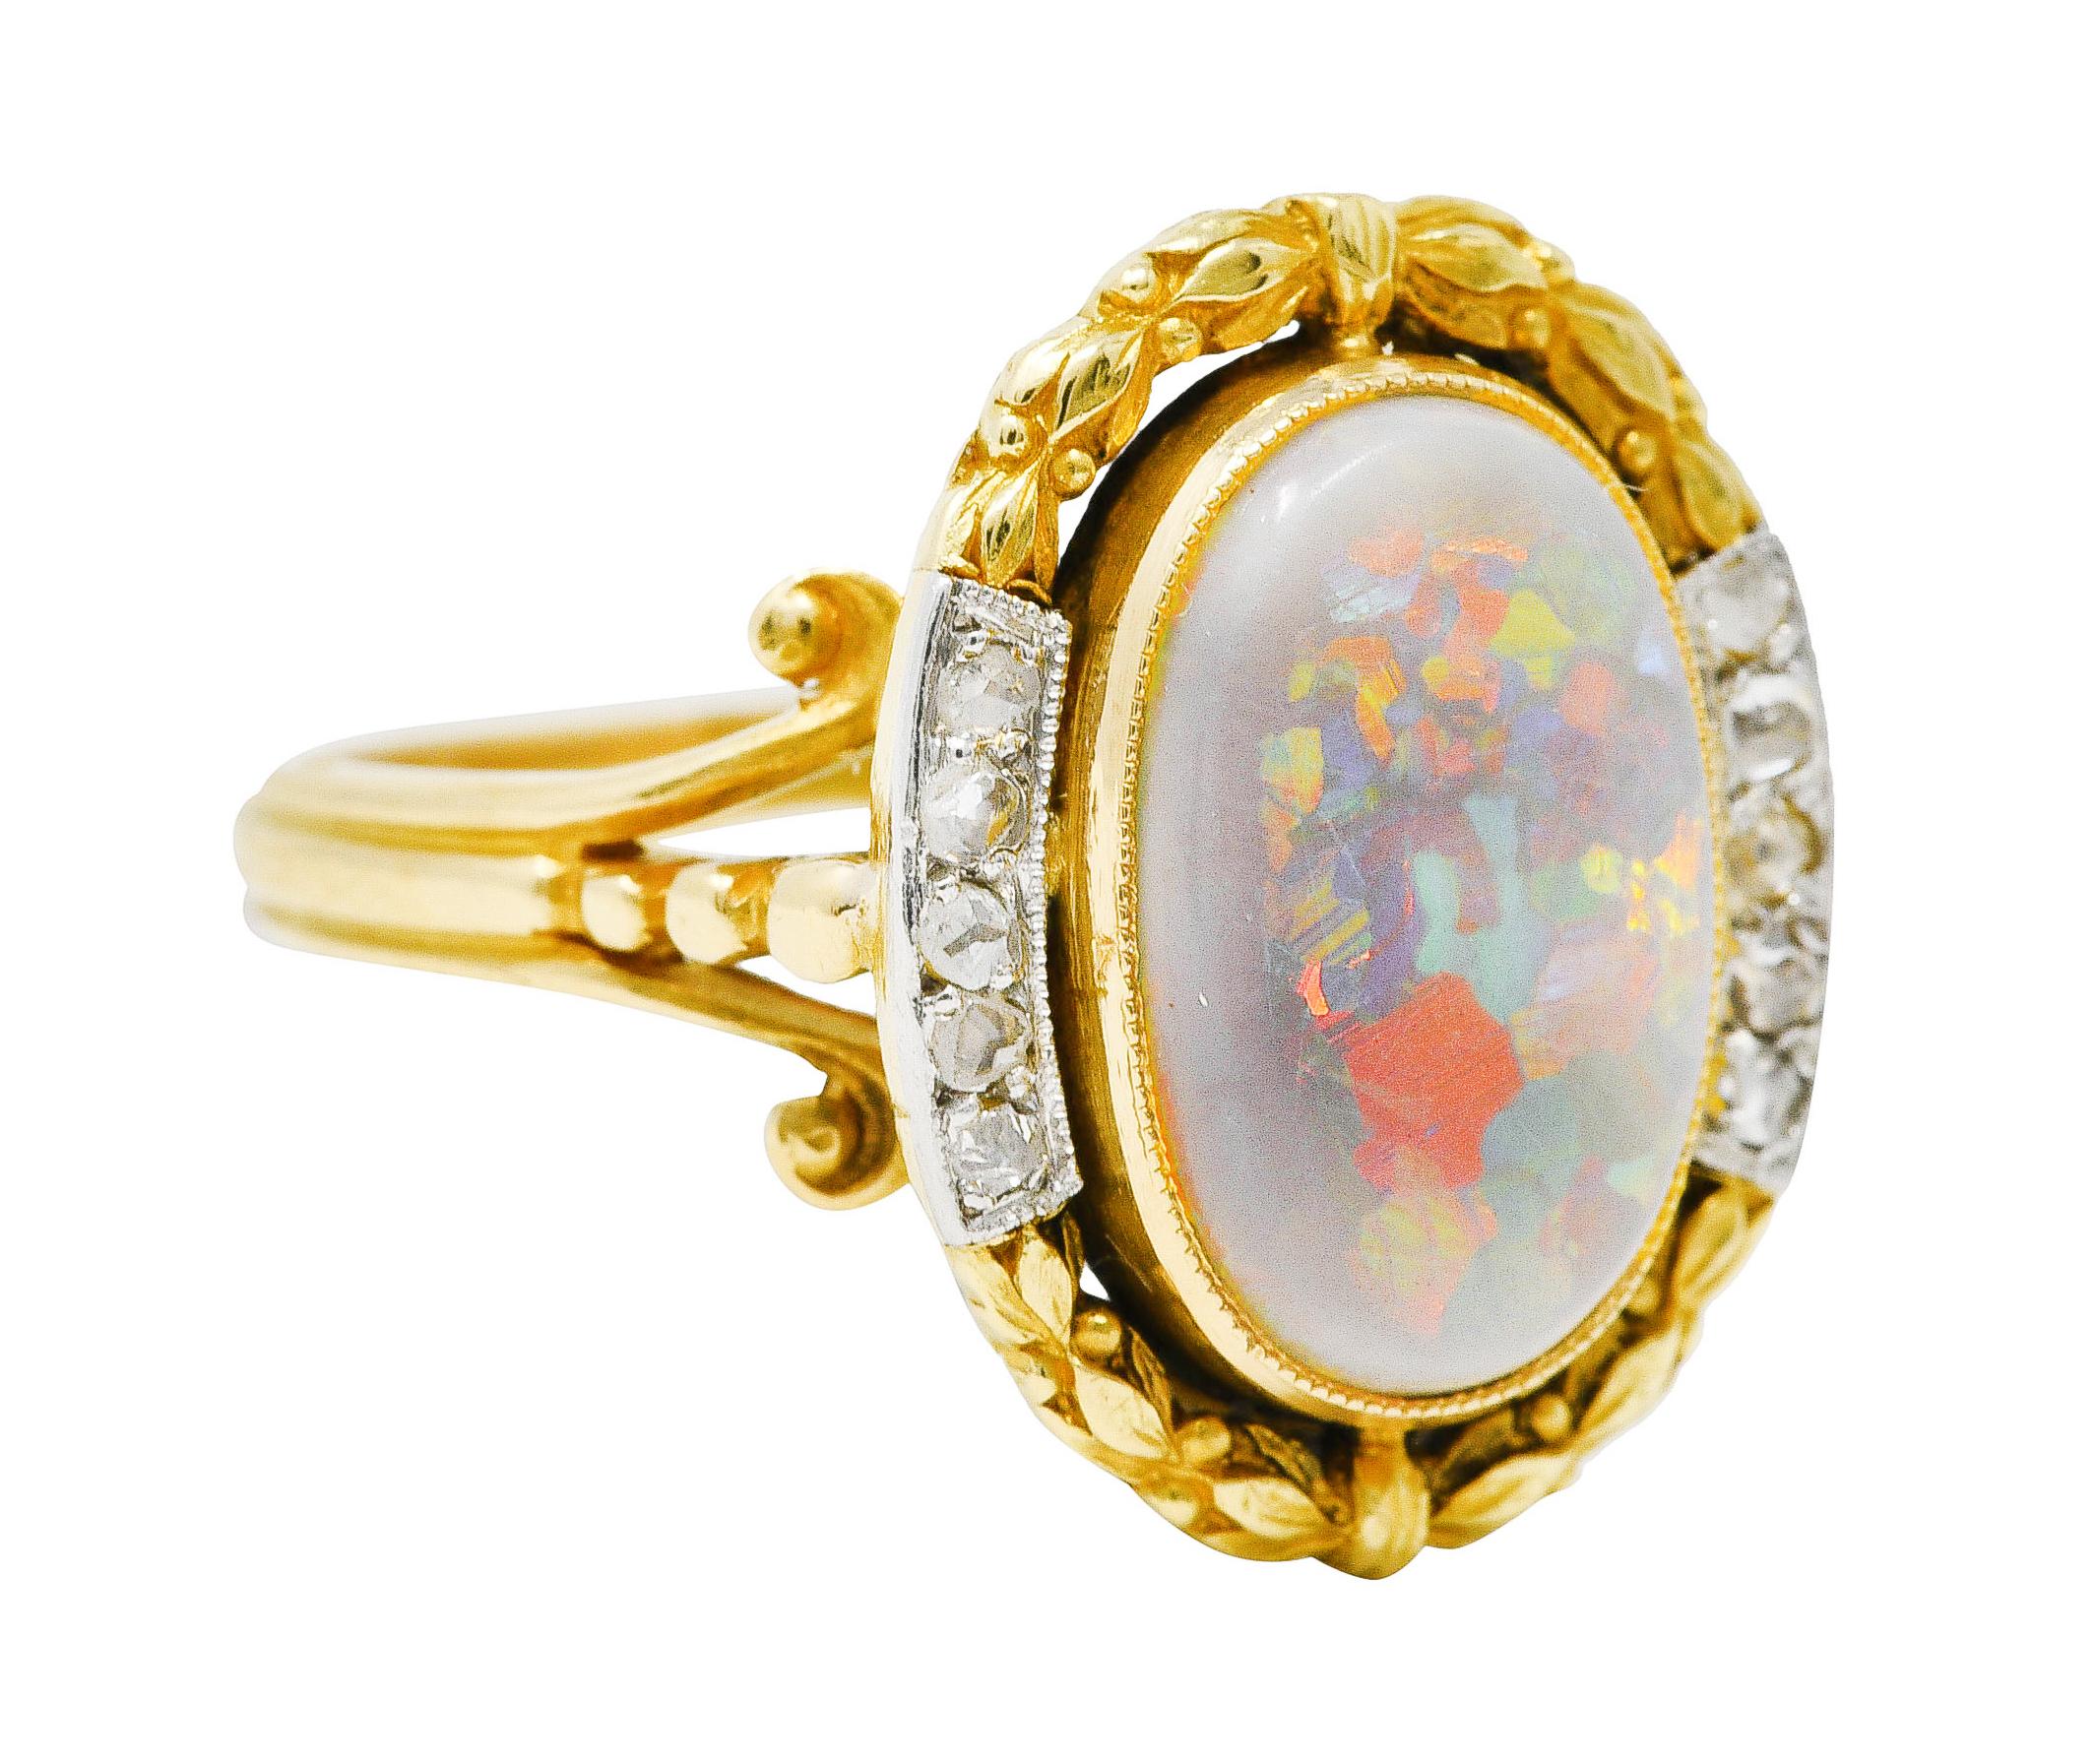 Centering an oval opal cabochon measuring 8.0 x 13.0 mm - gray in body color with spectral play-of-color. Bezel set with a highly rendered gold laurel motif surround with platinum-topped sections. With bead set rose cut diamonds weighing